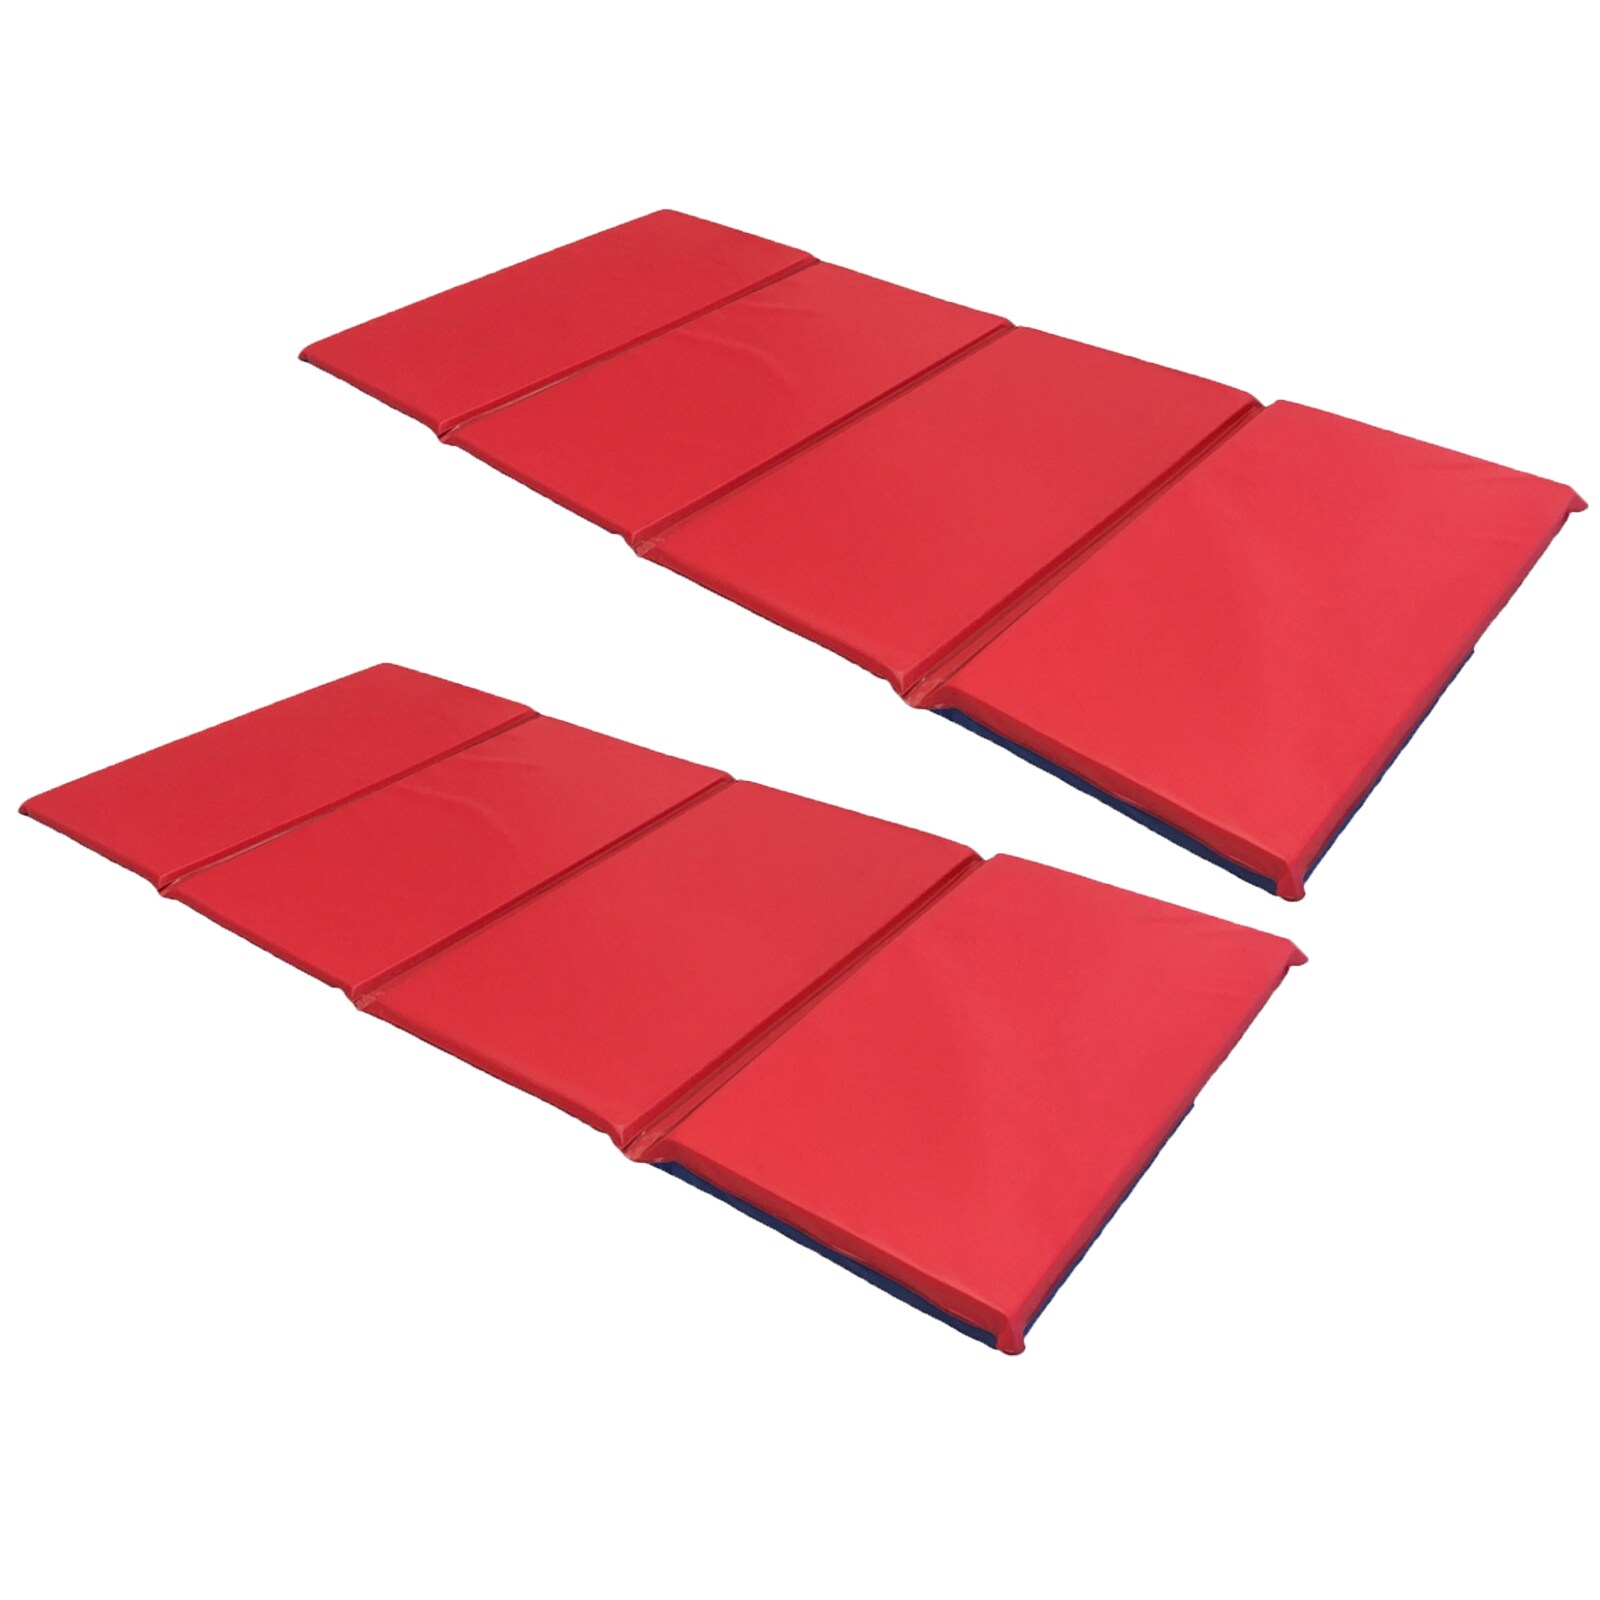 KinderMat Sleeping Exercise Rest Nap Mat Kids Camping School Daycare Red Blue 